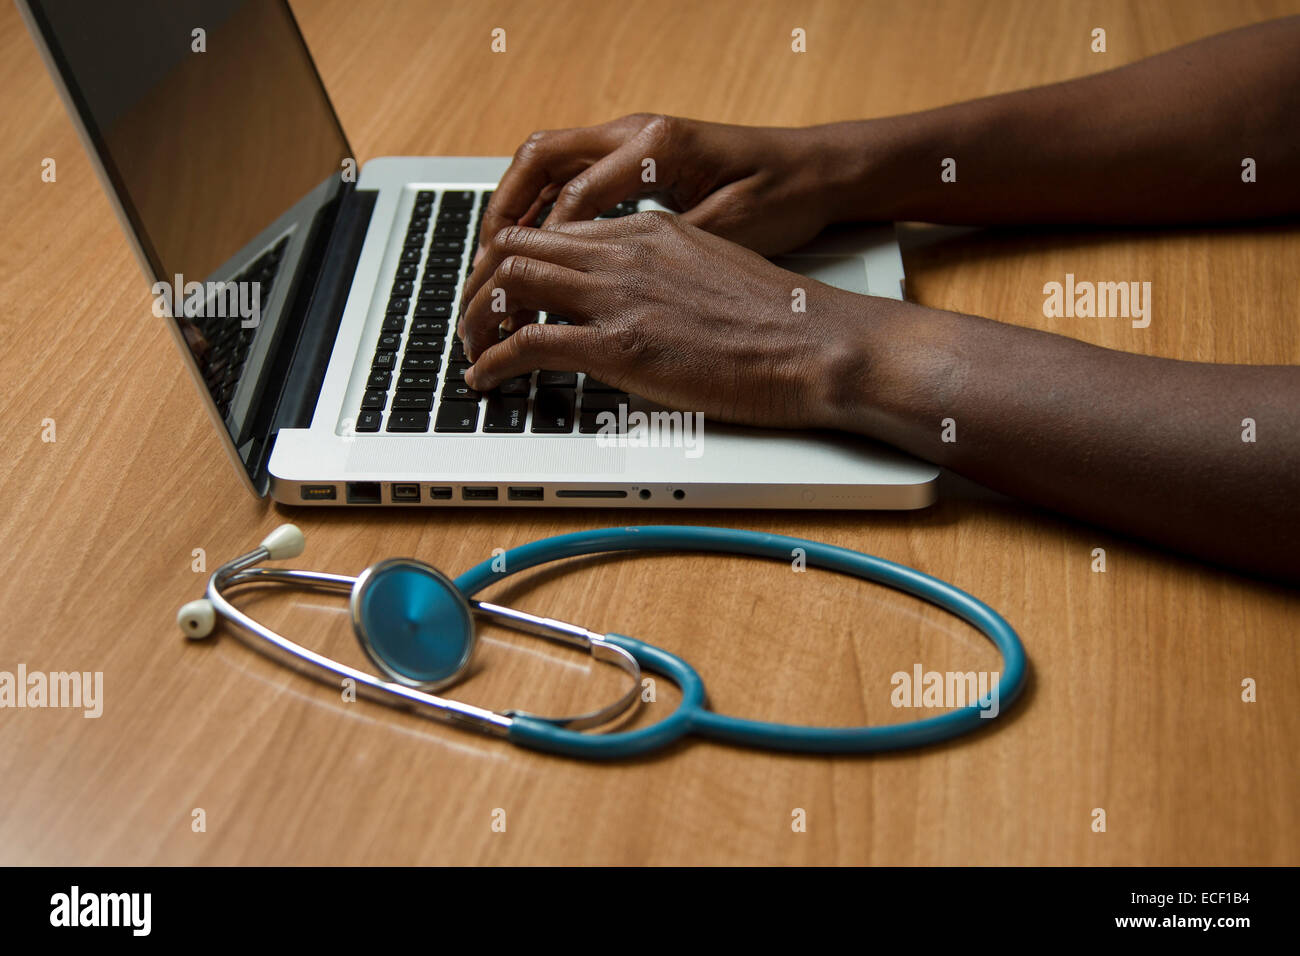 Stethoscope and laptop computer. Stock Photo